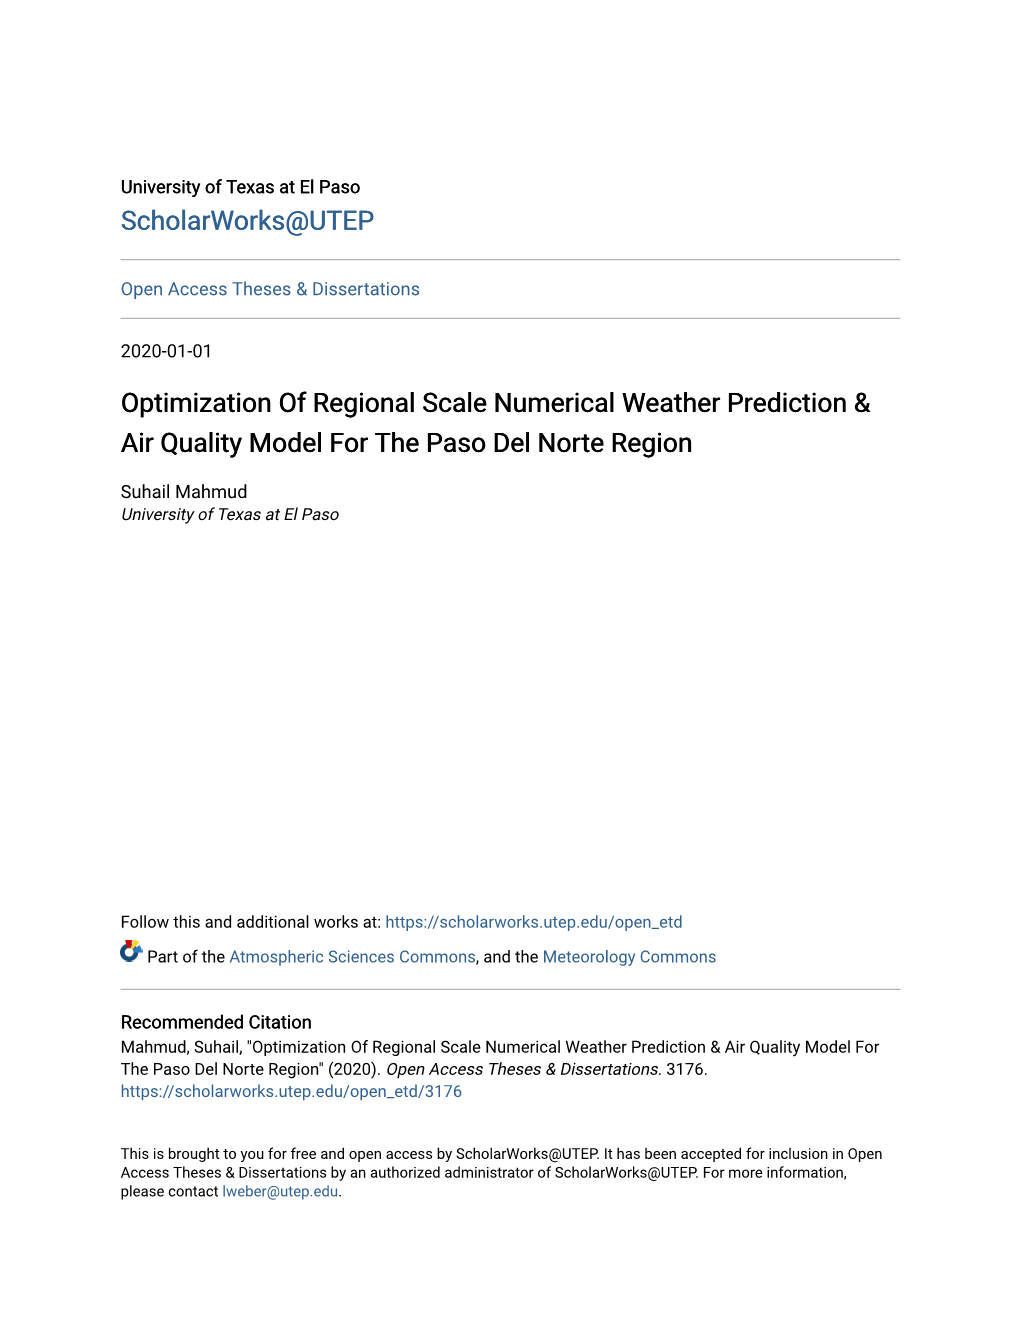 Optimization of Regional Scale Numerical Weather Prediction & Air